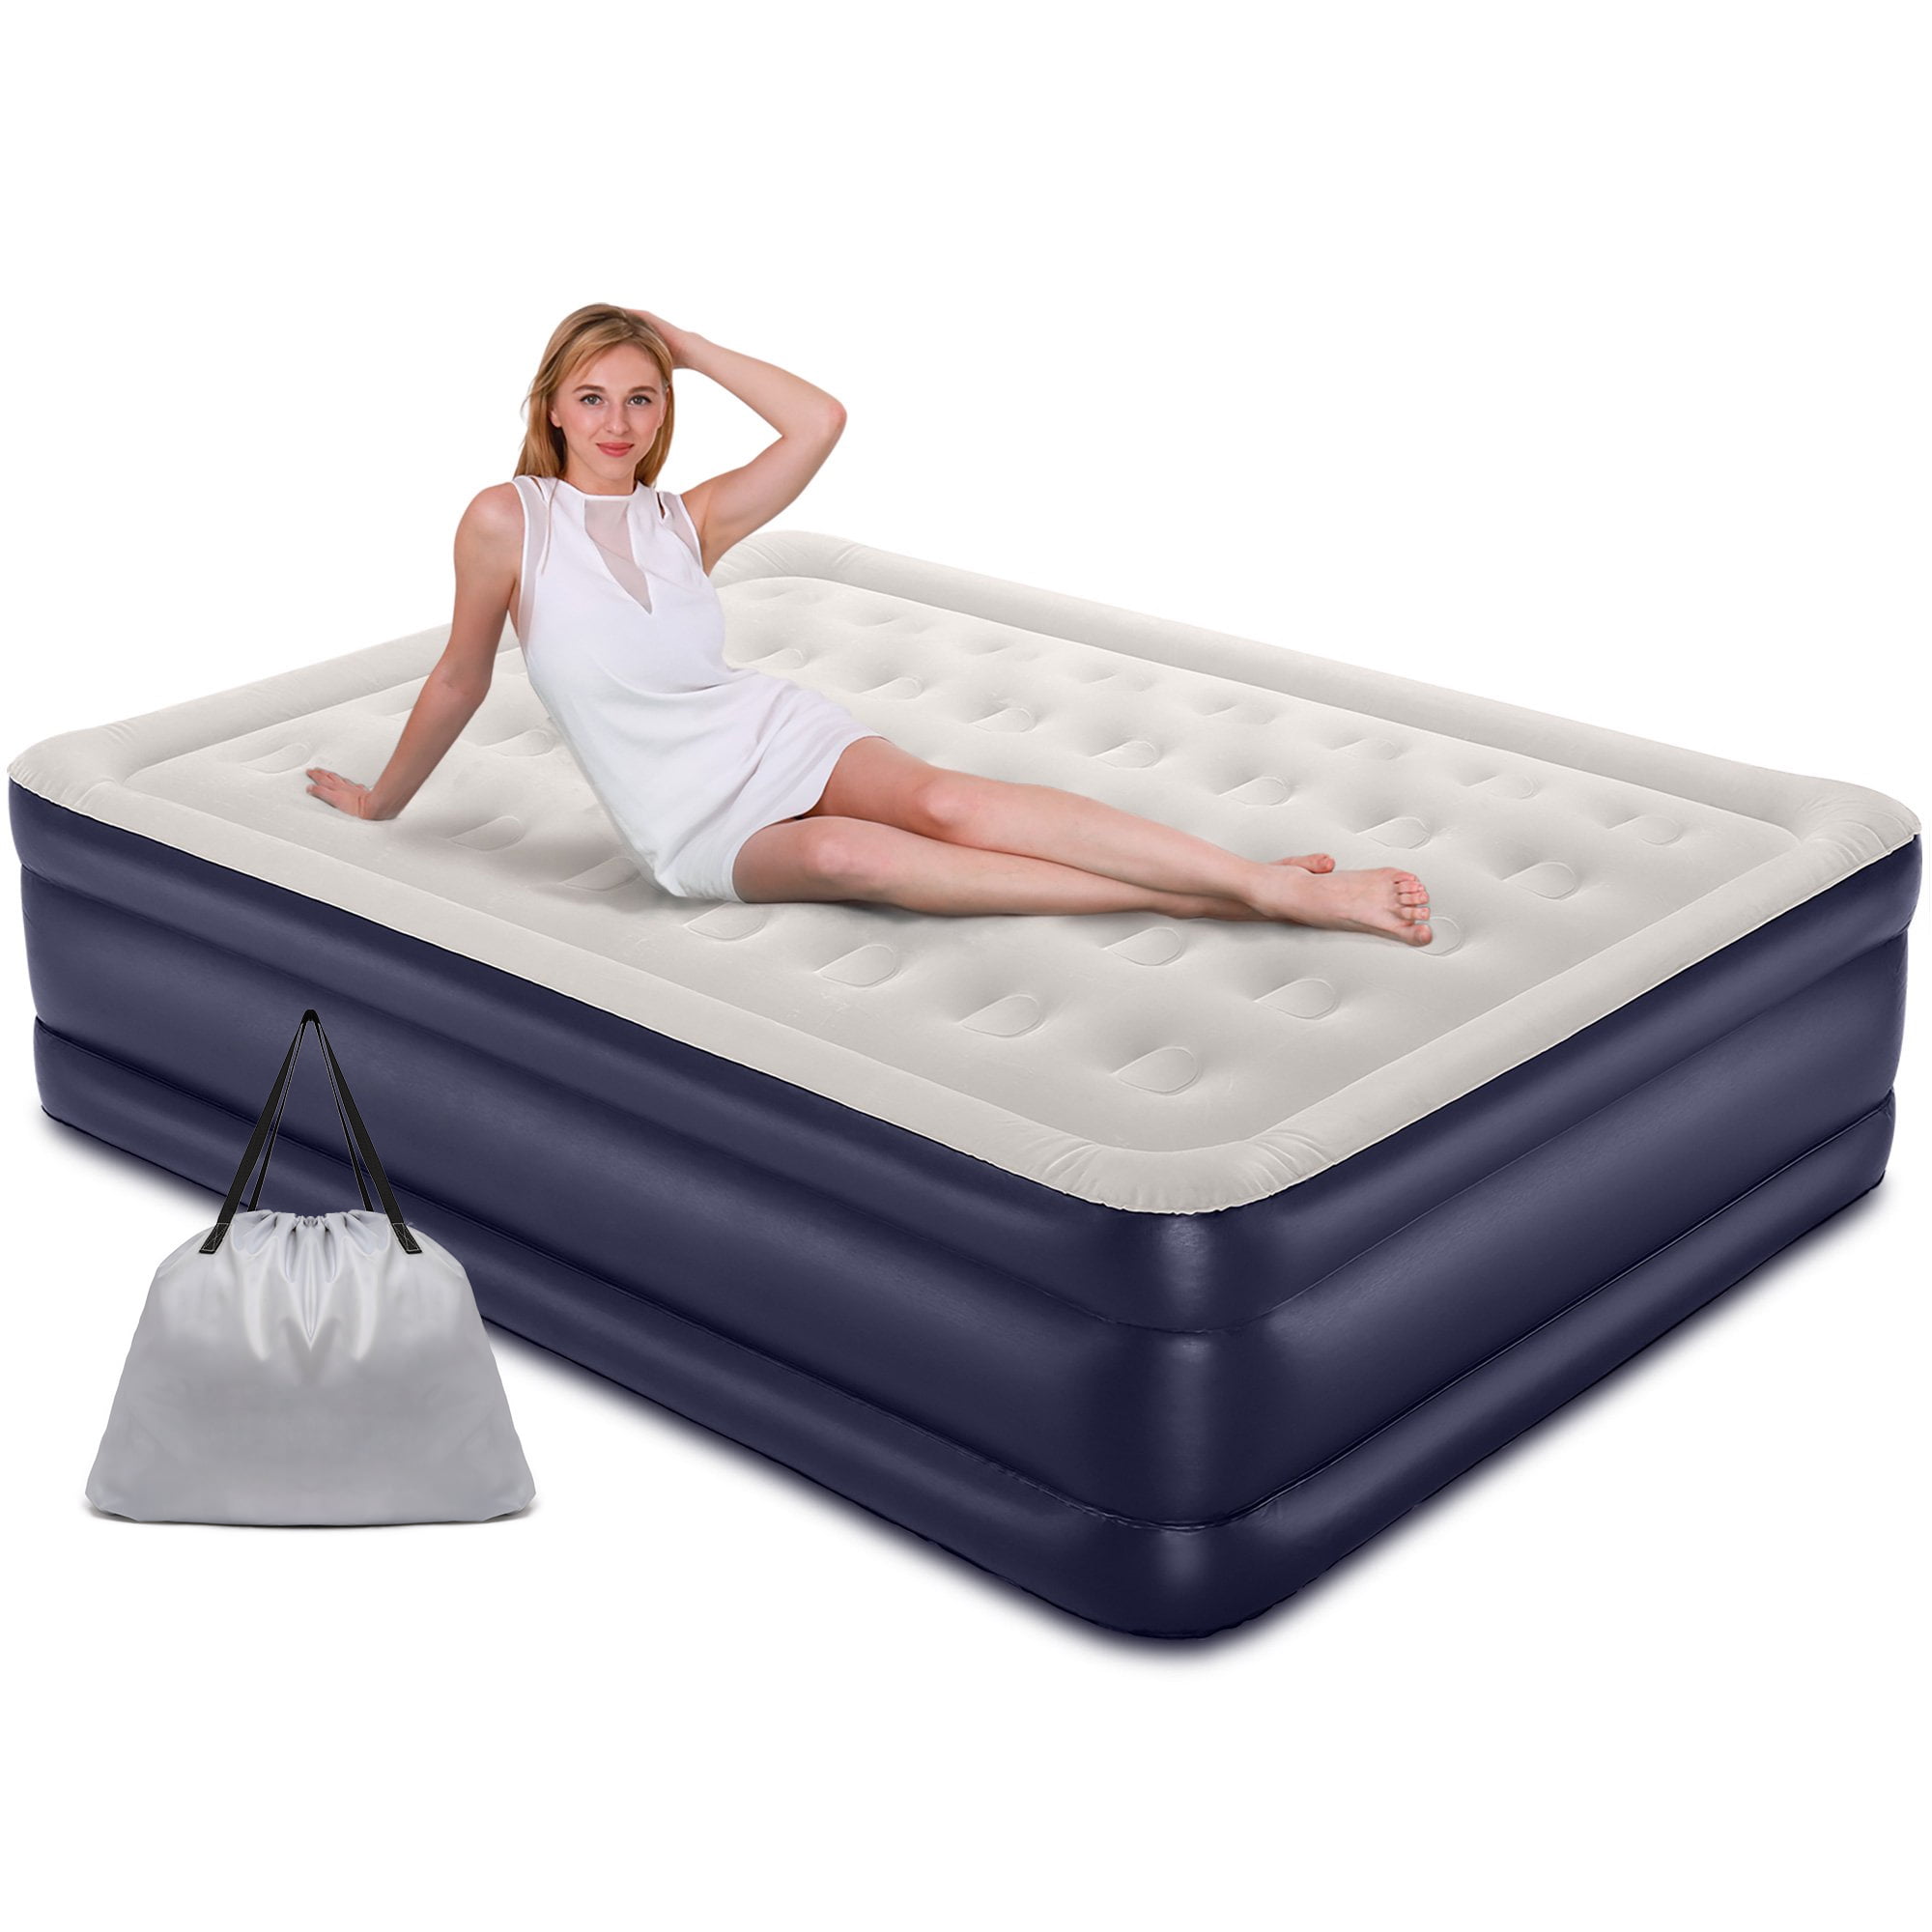 Inflatable Airbed Air Mattress Bed Queen 18" with Headboard Built-In Pump Guest 